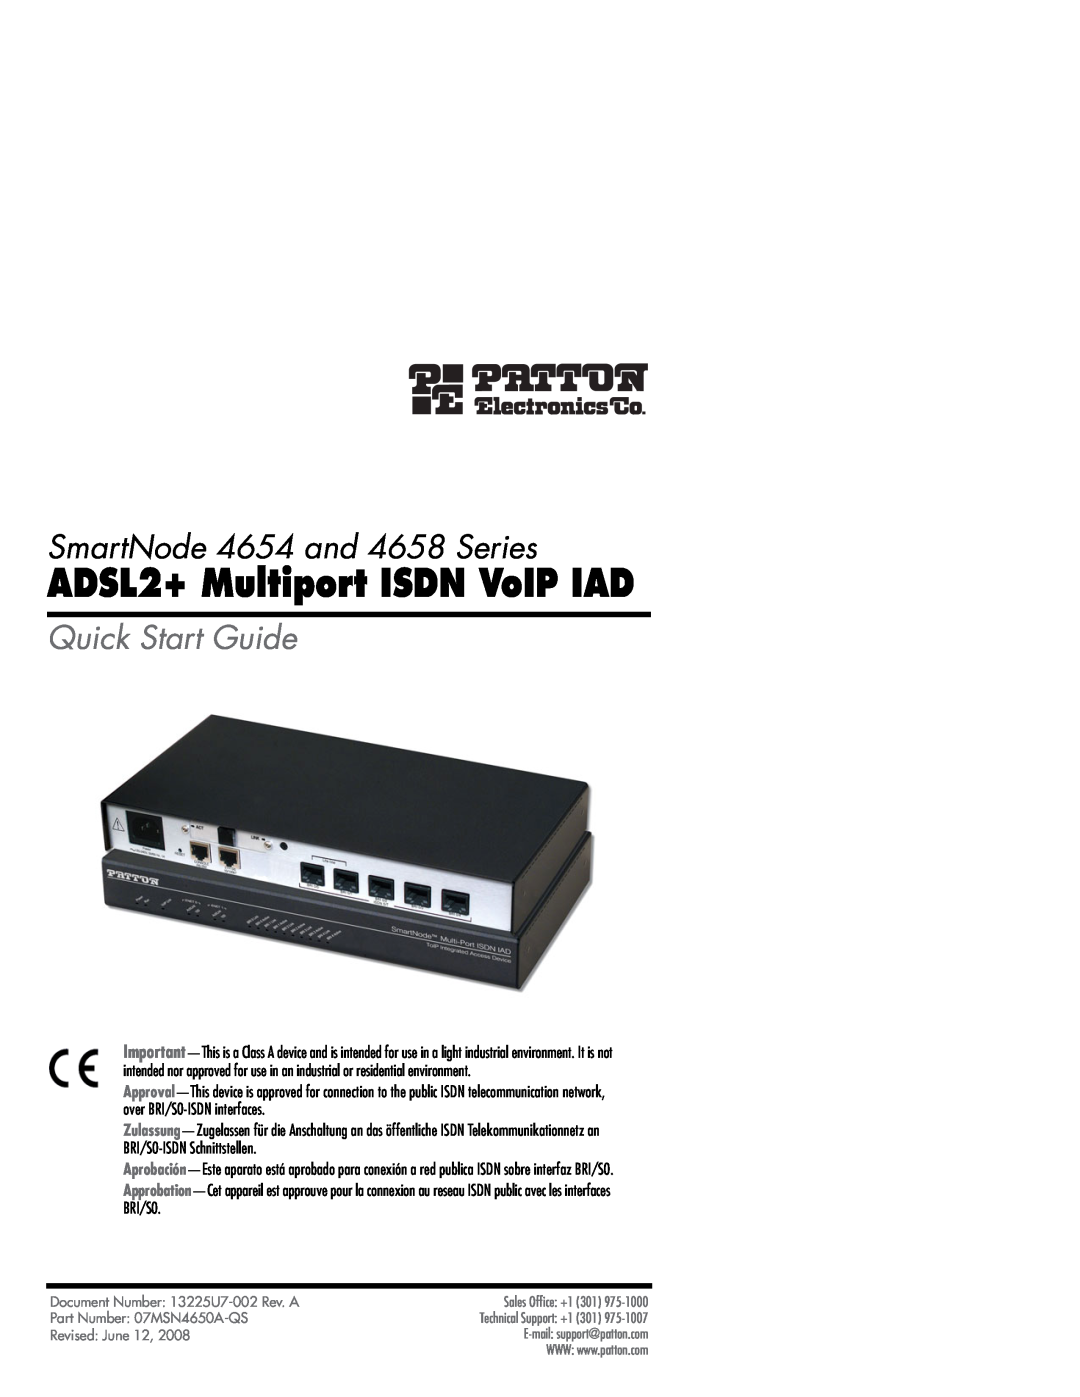 Patton electronic 4654 Series quick start ADSL2+ Multiport ISDN VoIP IAD, SmartNode 4654 and 4658 Series 